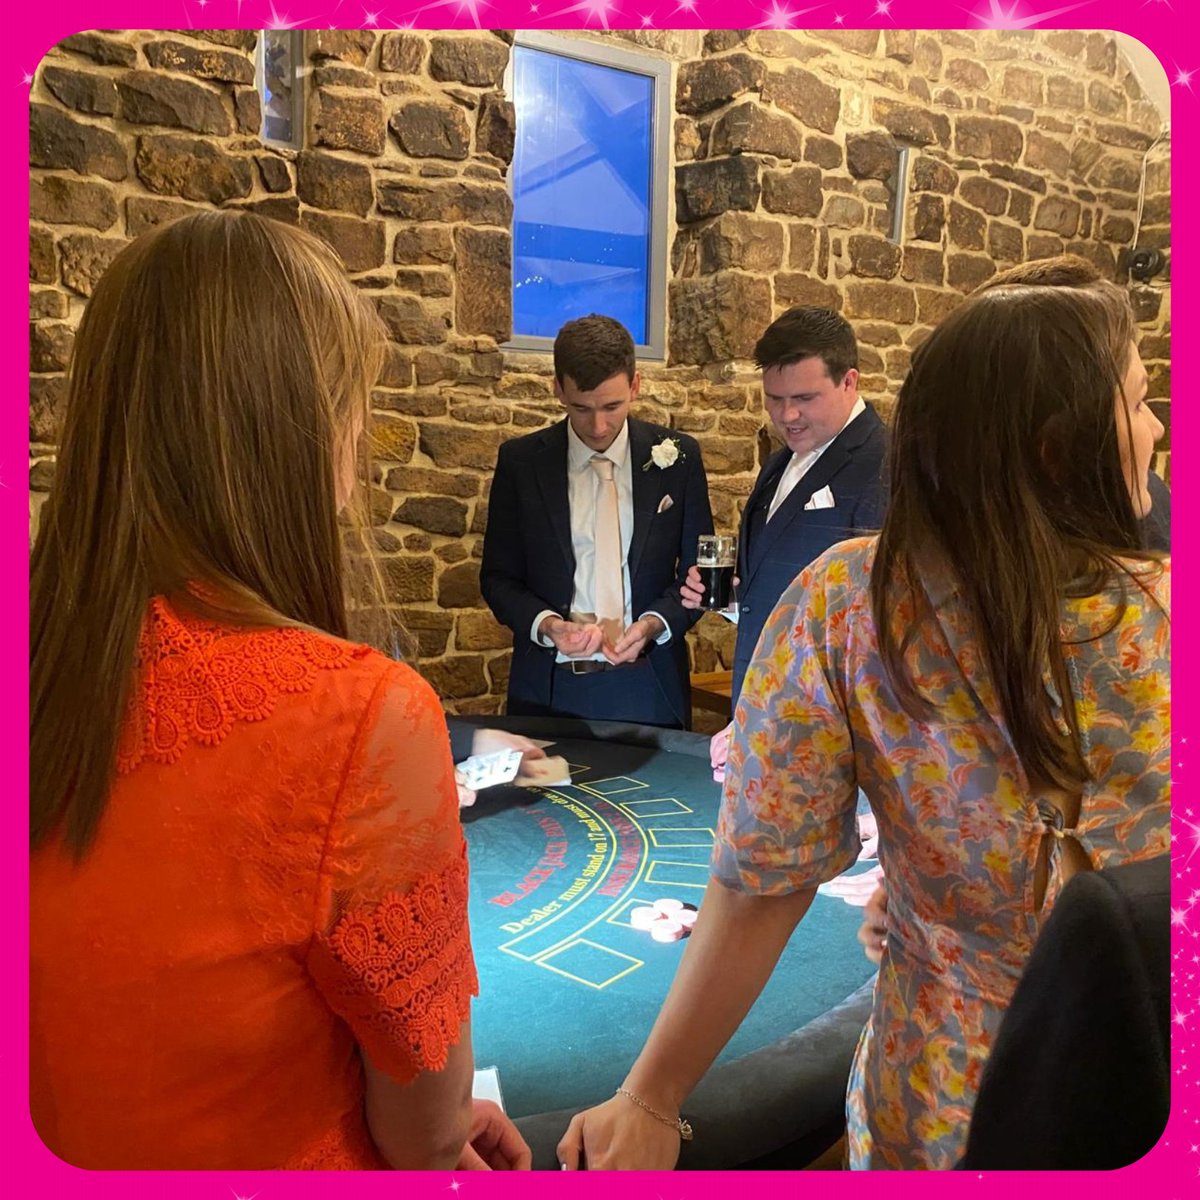 🎲 Want to spice up your party or event? 🎉 Our #Blackjack tables is the perfect way to add excitement and thrill to any occasion. 🃏 With professional dealers and top-notch equipment, you and your guests are guaranteed to have a blast! 💰 #CasinoParty #EventEntertainment